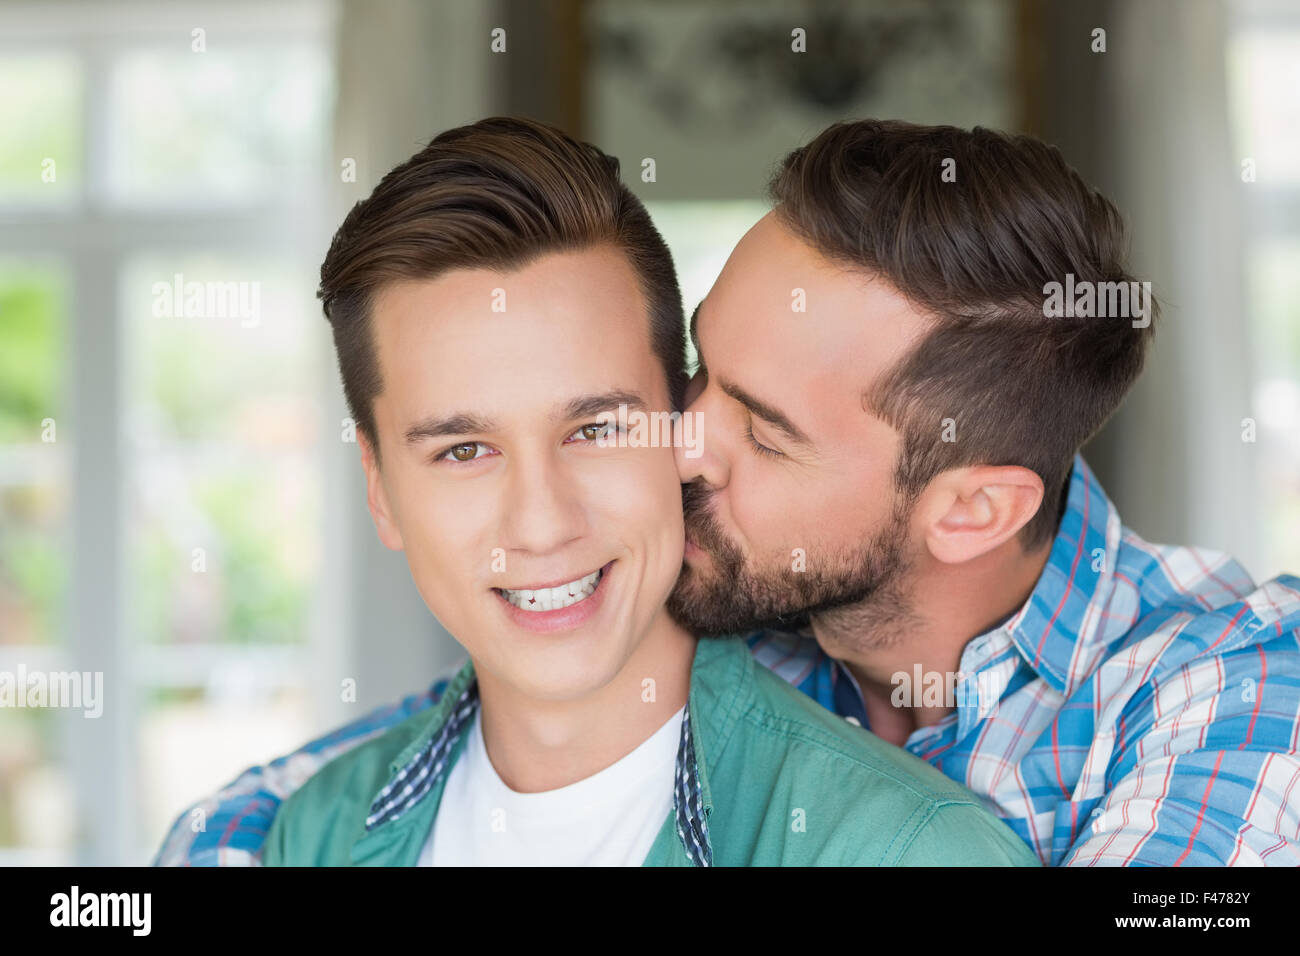 Homosexual couple men kissing each other Stock Photo